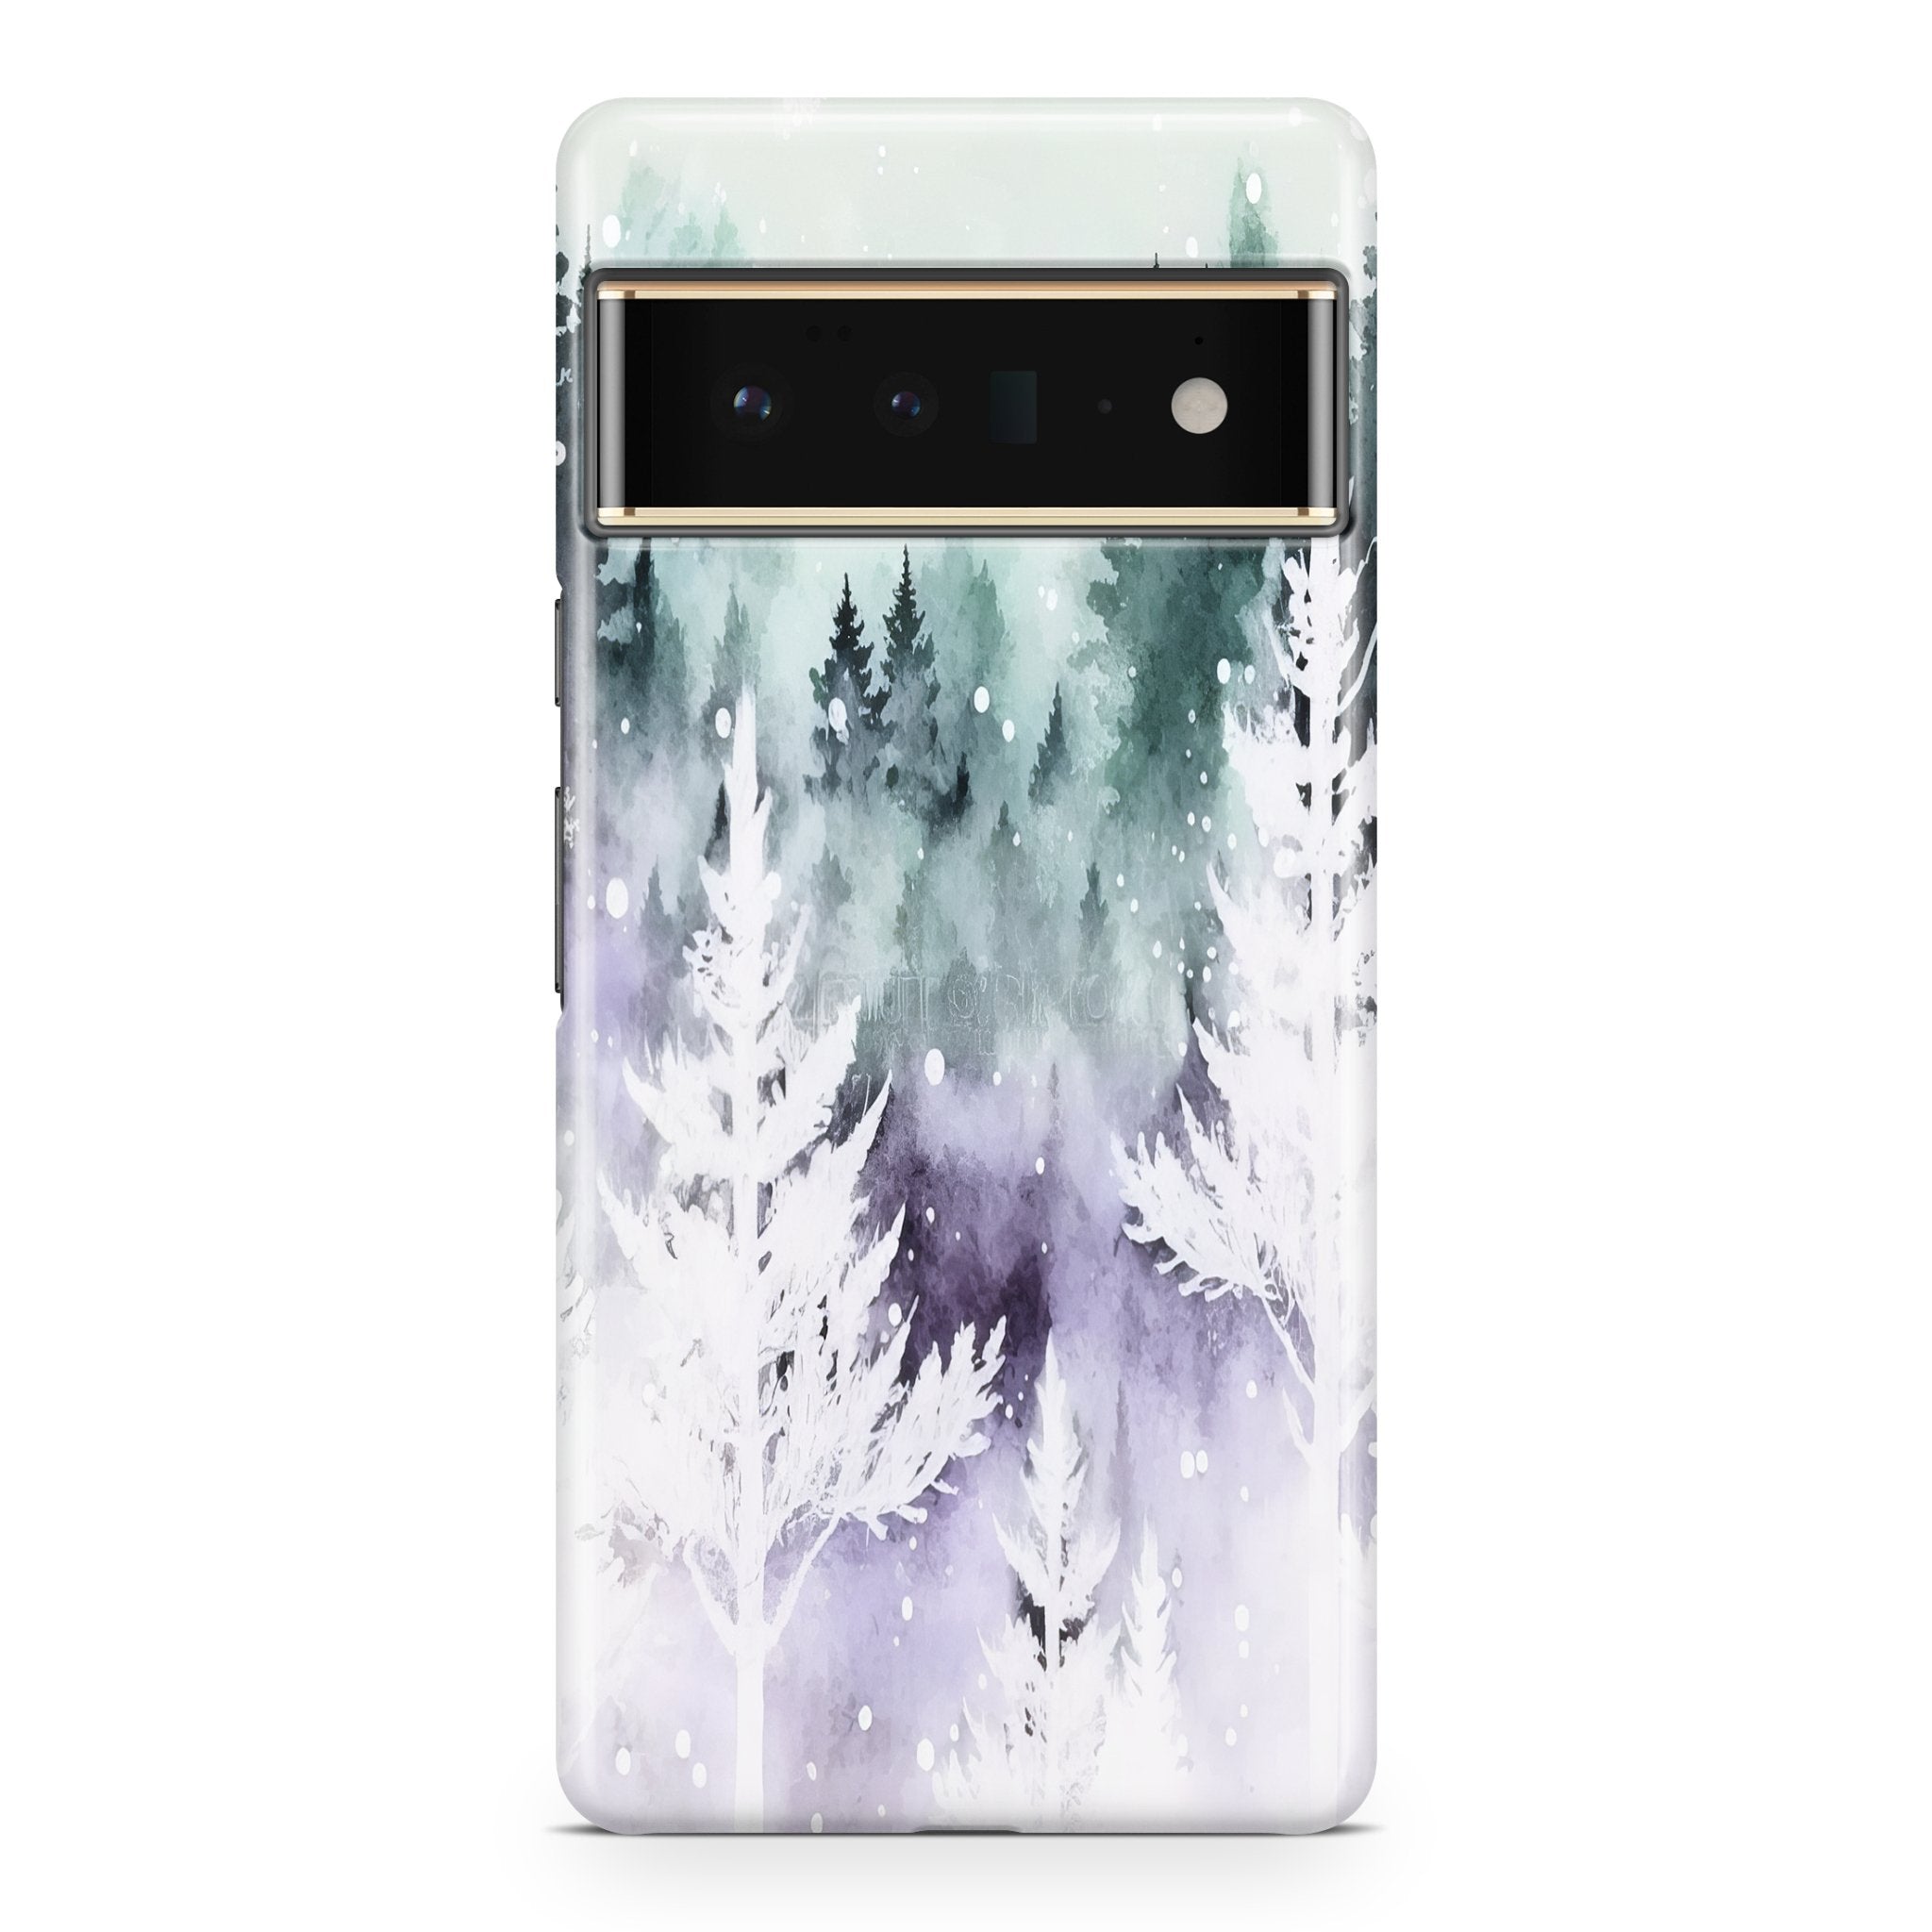 Cloudy Forest - Google phone case designs by CaseSwagger